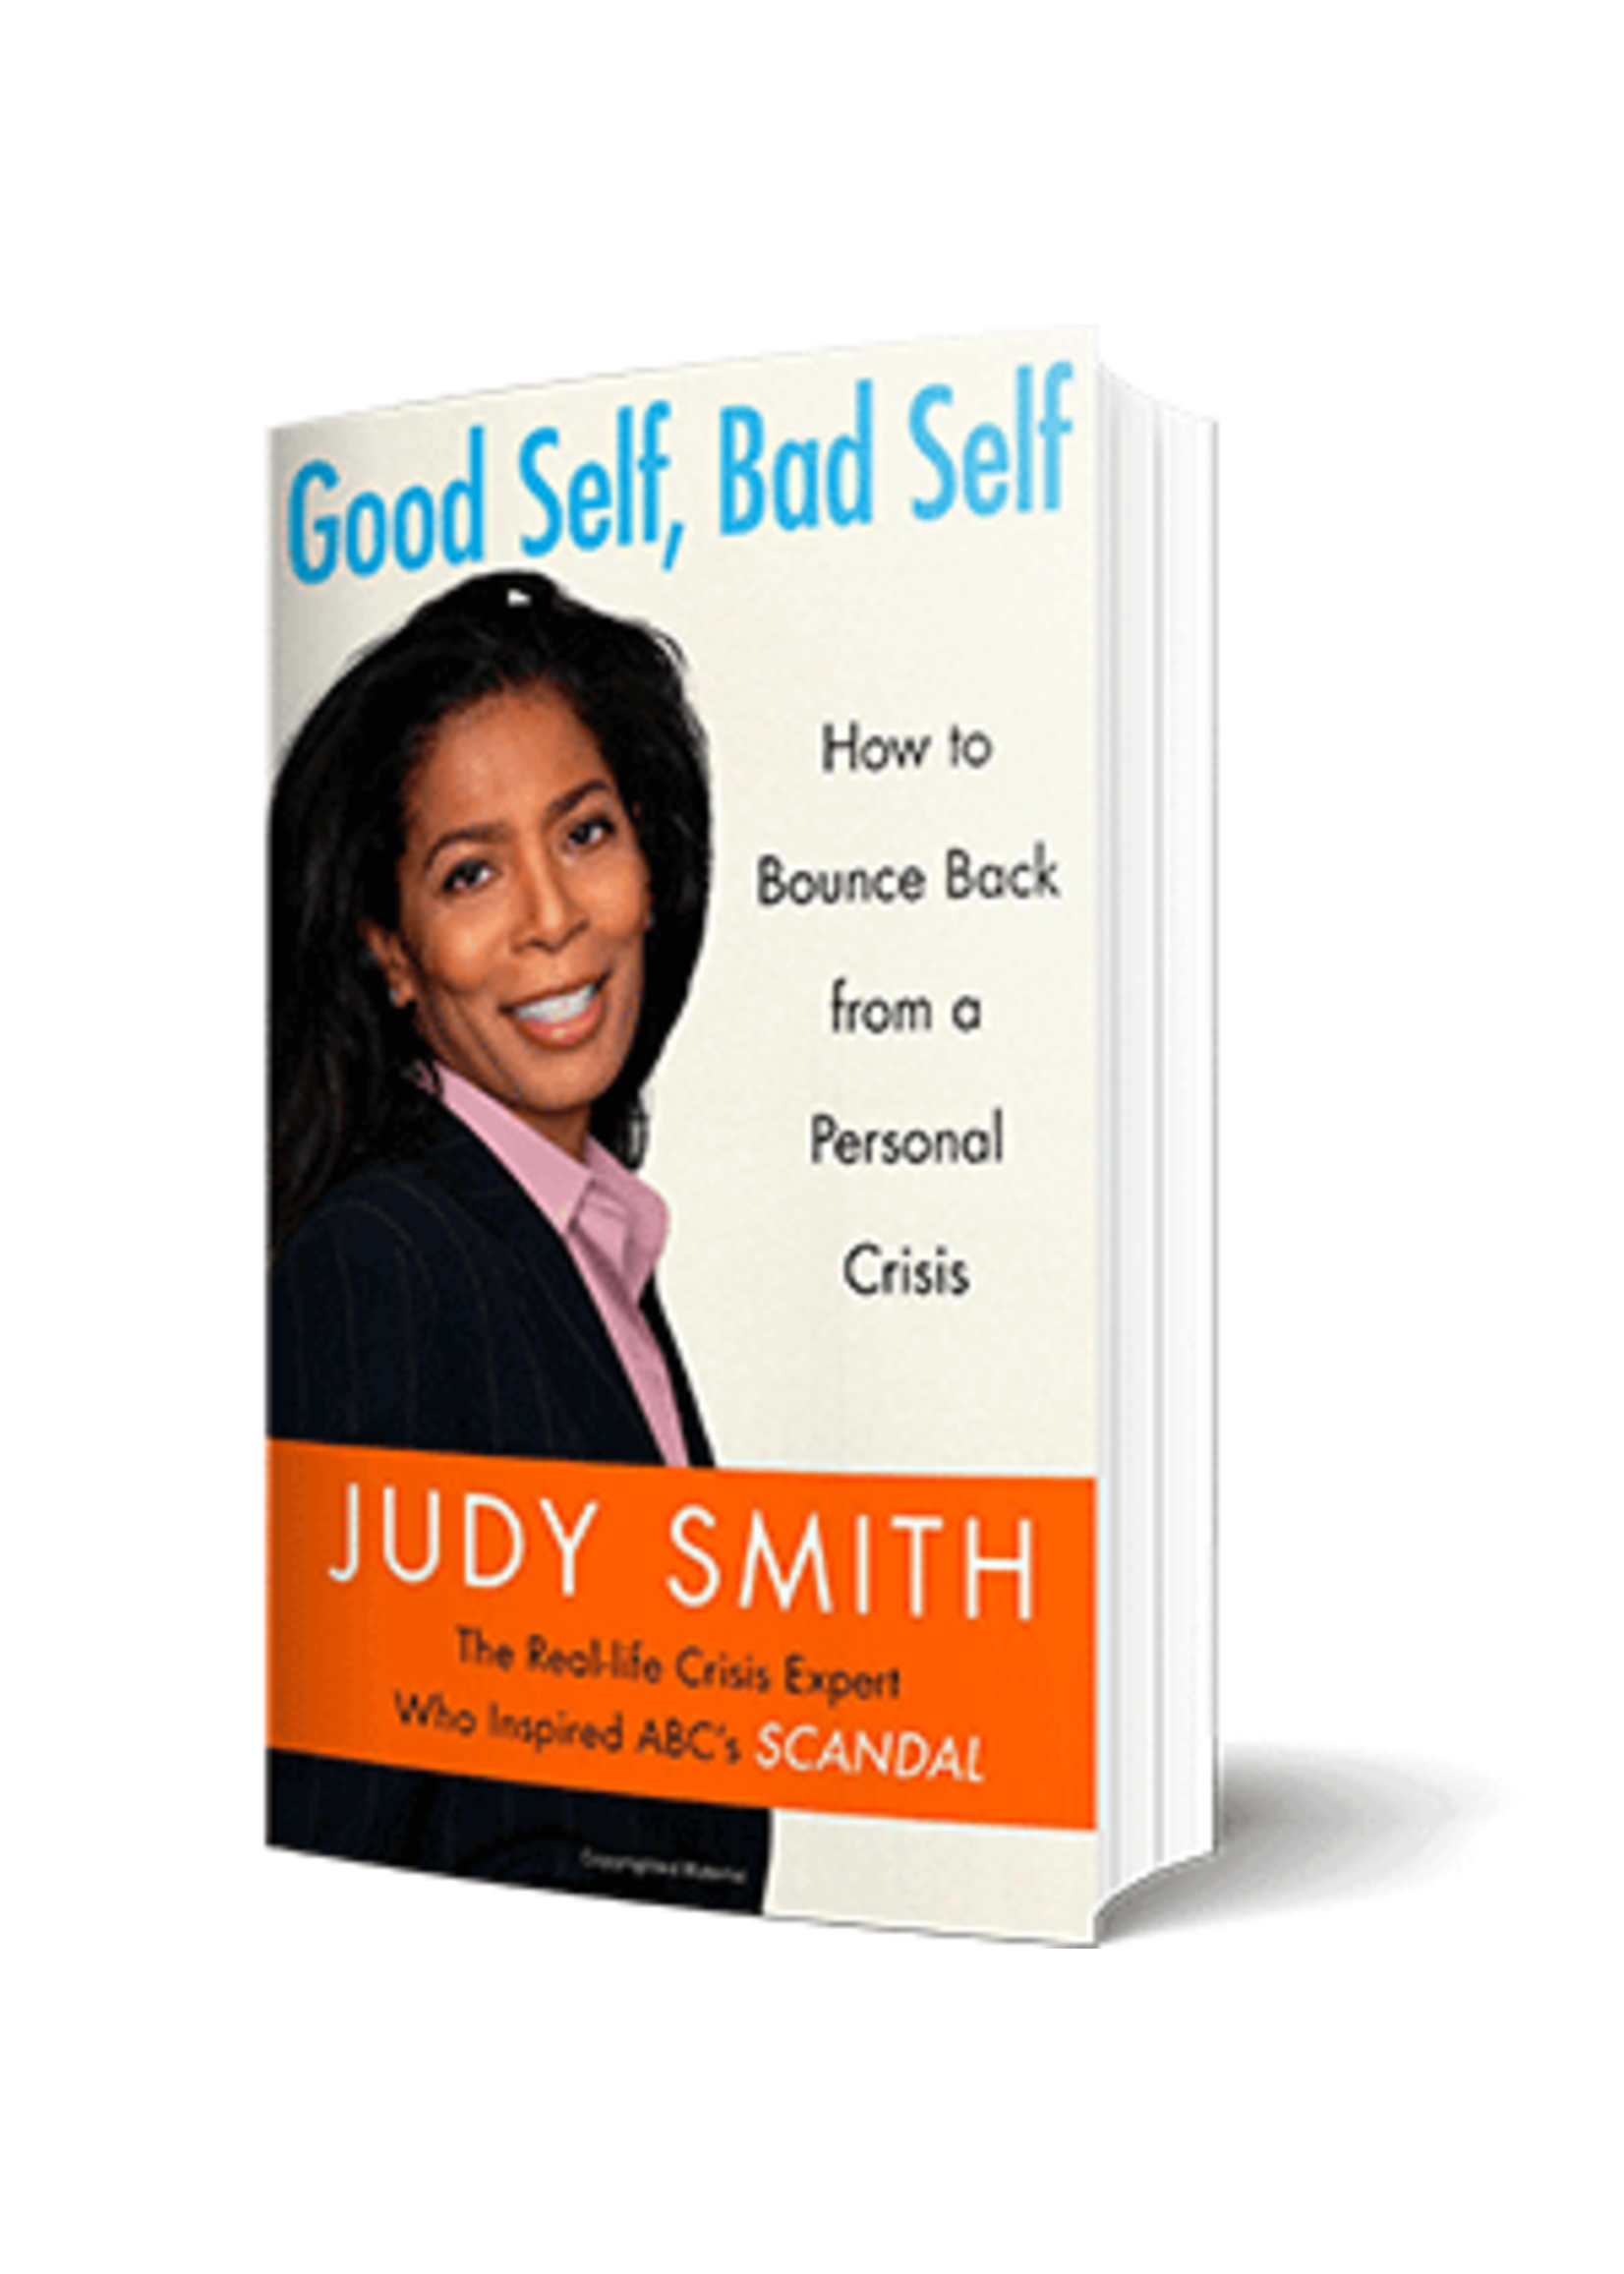 Good Self, Bad Self: How to Bounce Back from a Personal Crisis